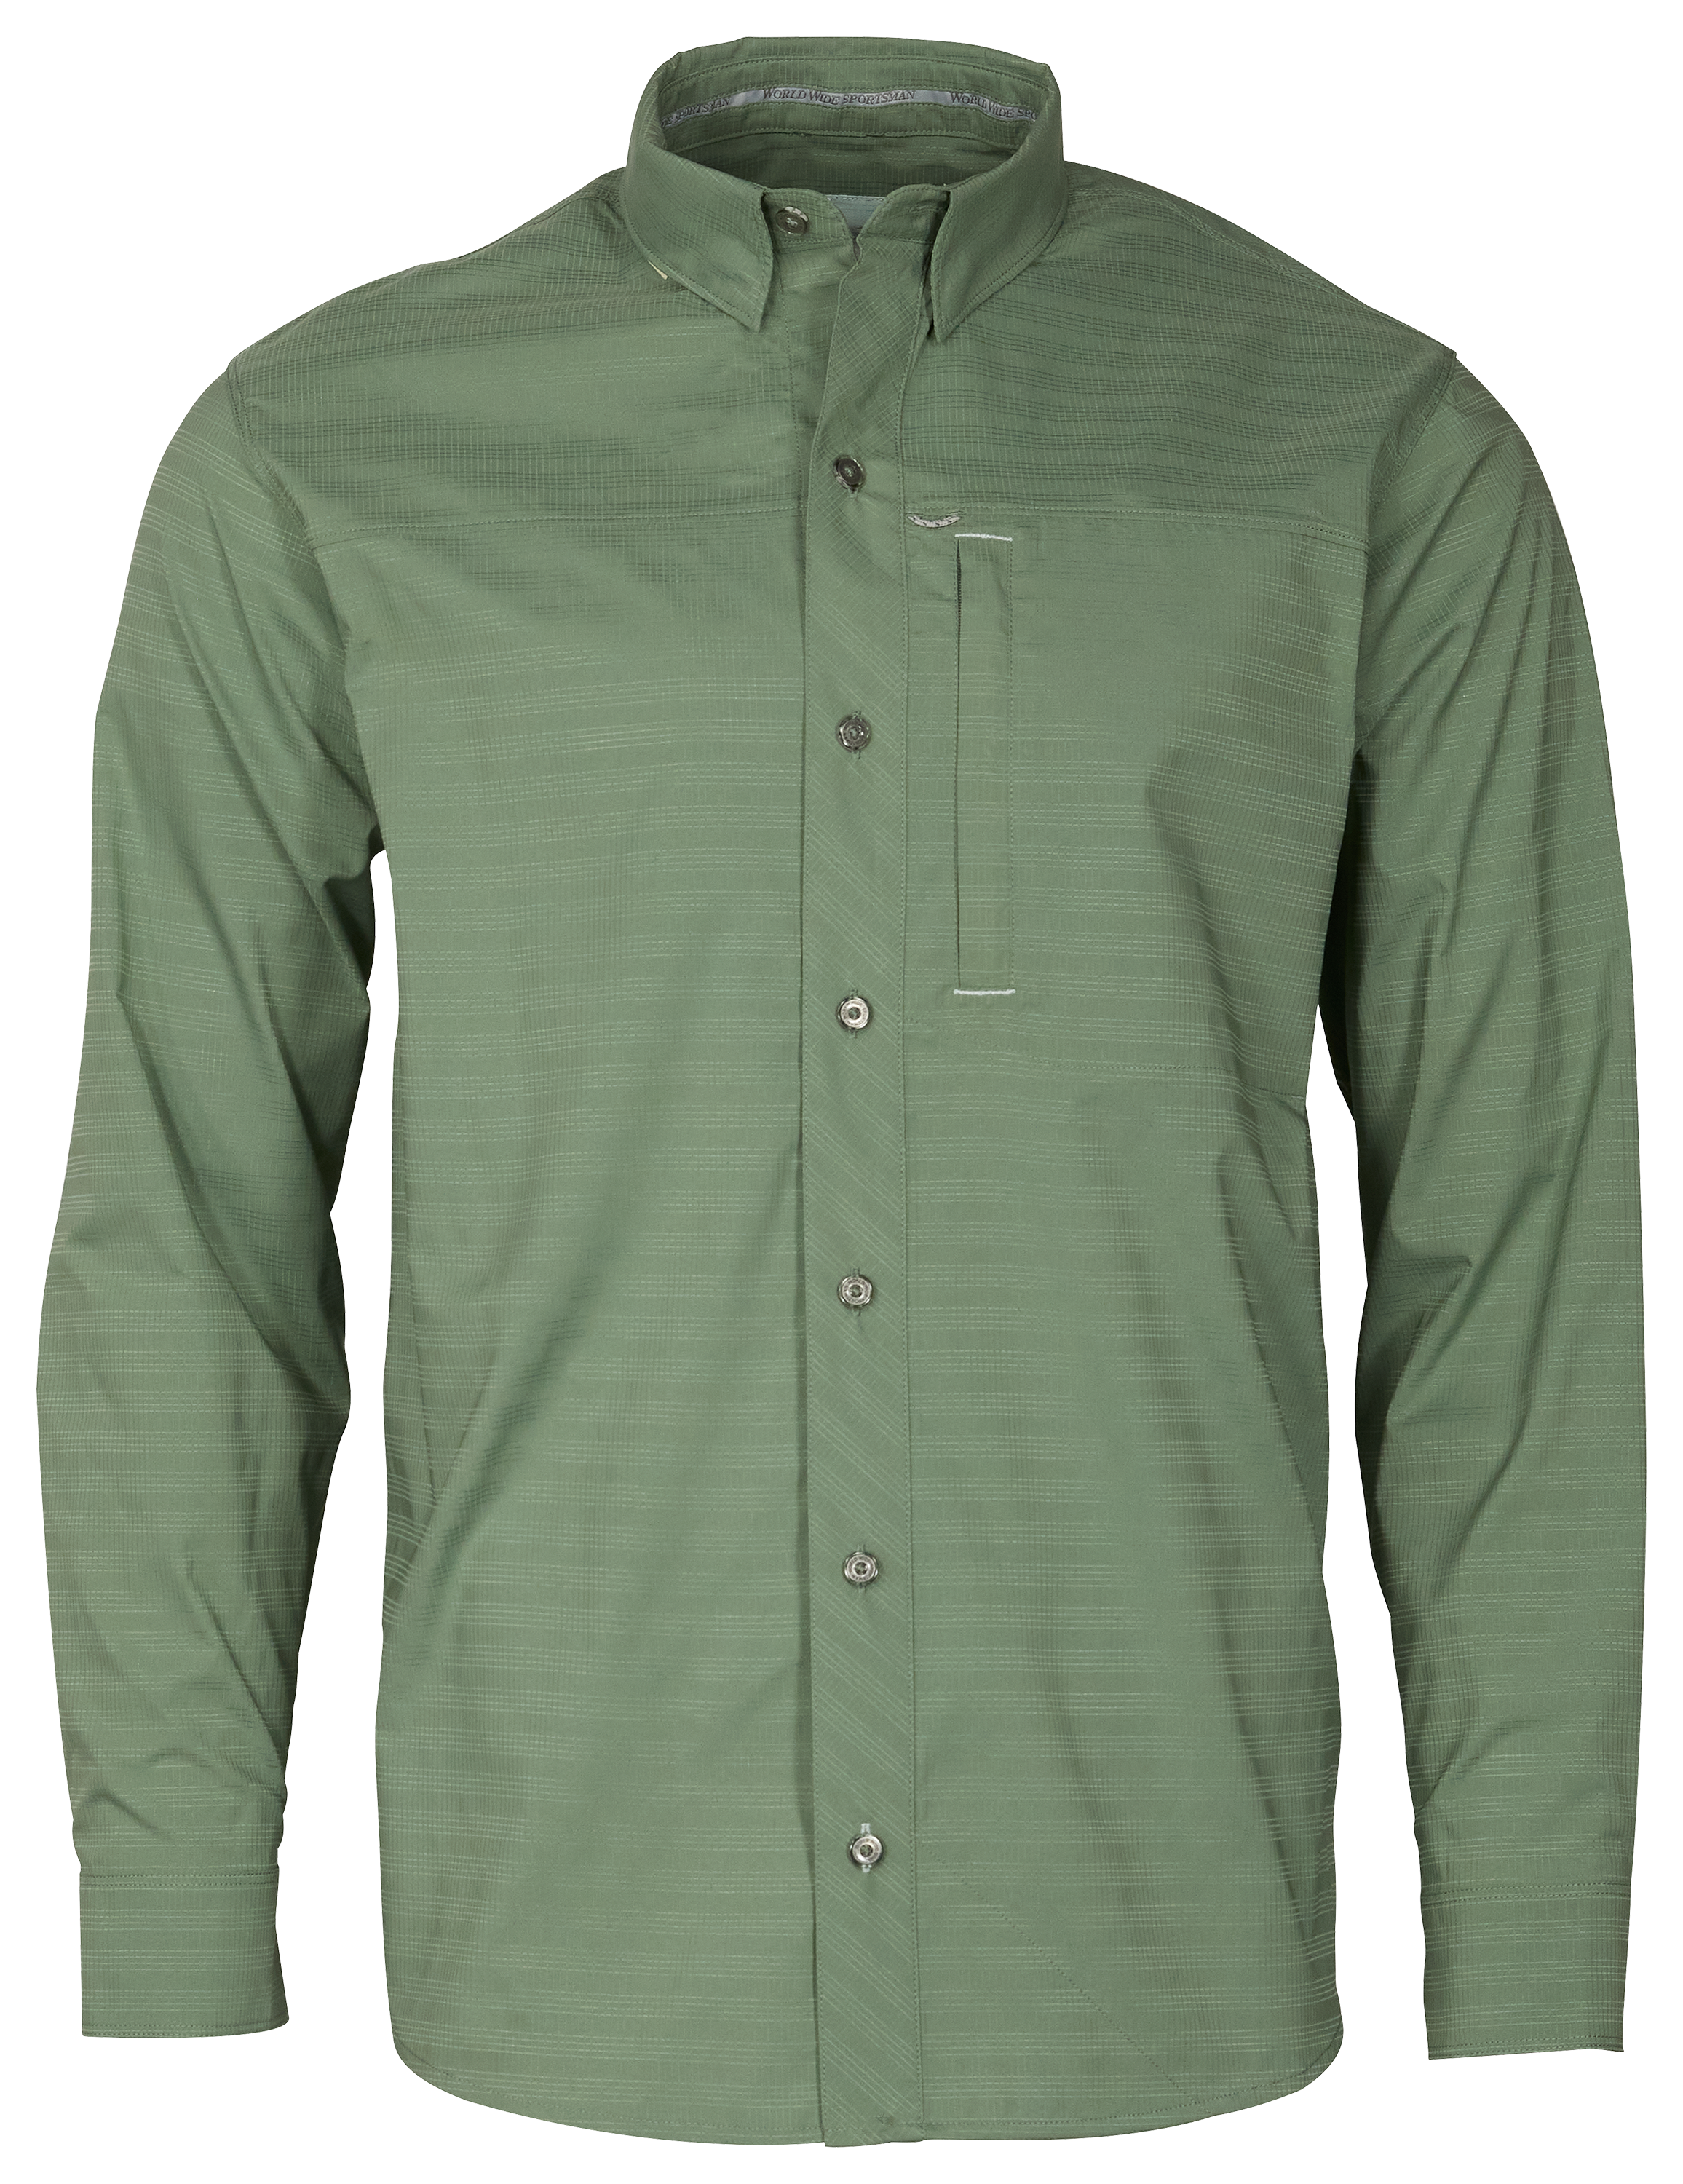 RedHead Ranch Canyonville Performance Short-Sleeve Shirt for Men